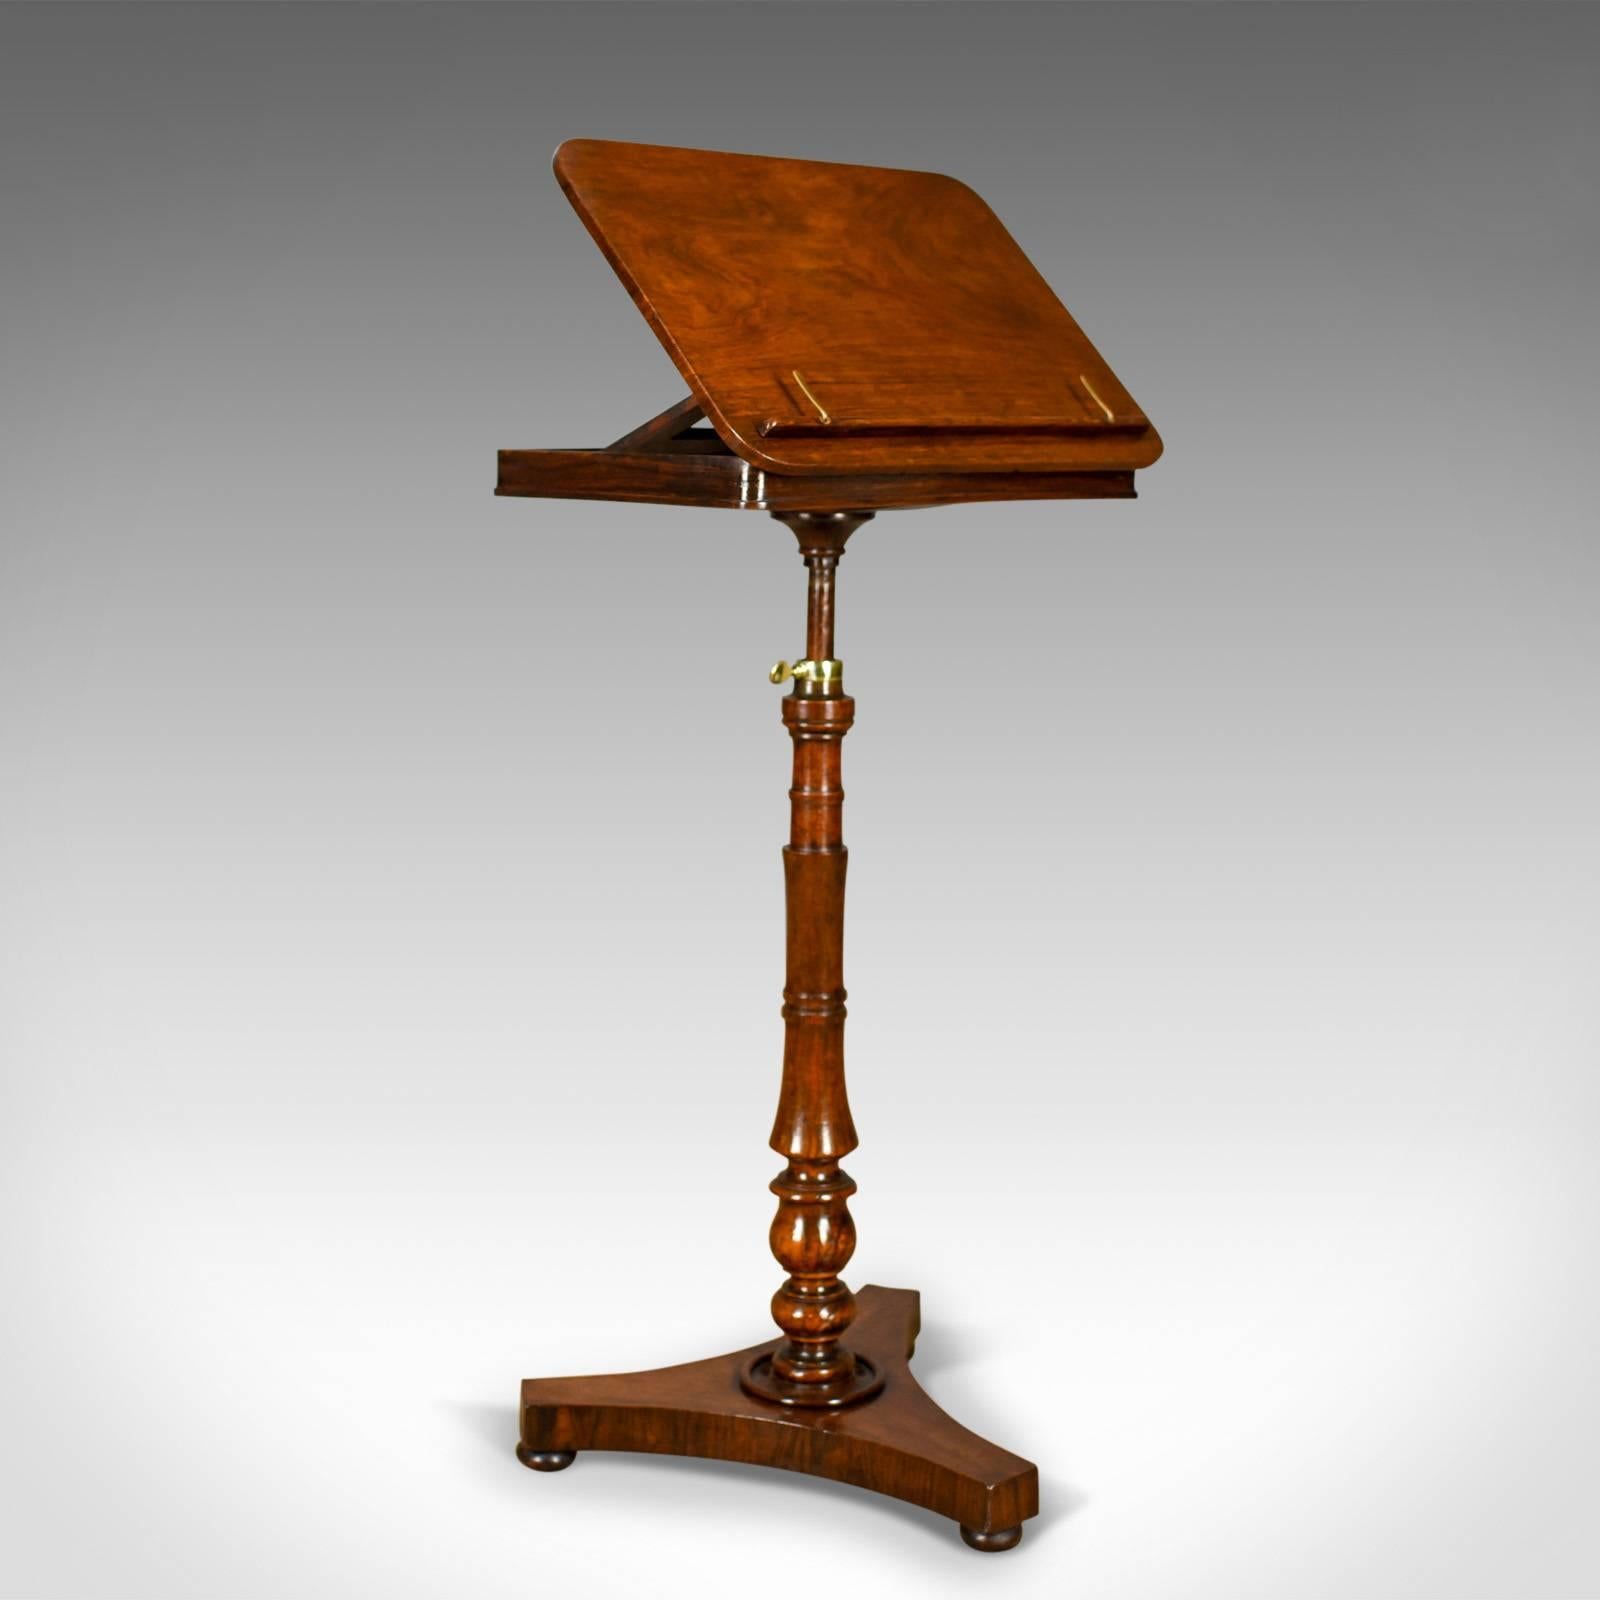 This is an antique music stand, an English, Regency adjustable, rosewood lectern dating to circa 1820.

Delightful color and tone to the rosewood
Well figured, displaying grain interest with a desirable aged patina
Fully adjustable height and